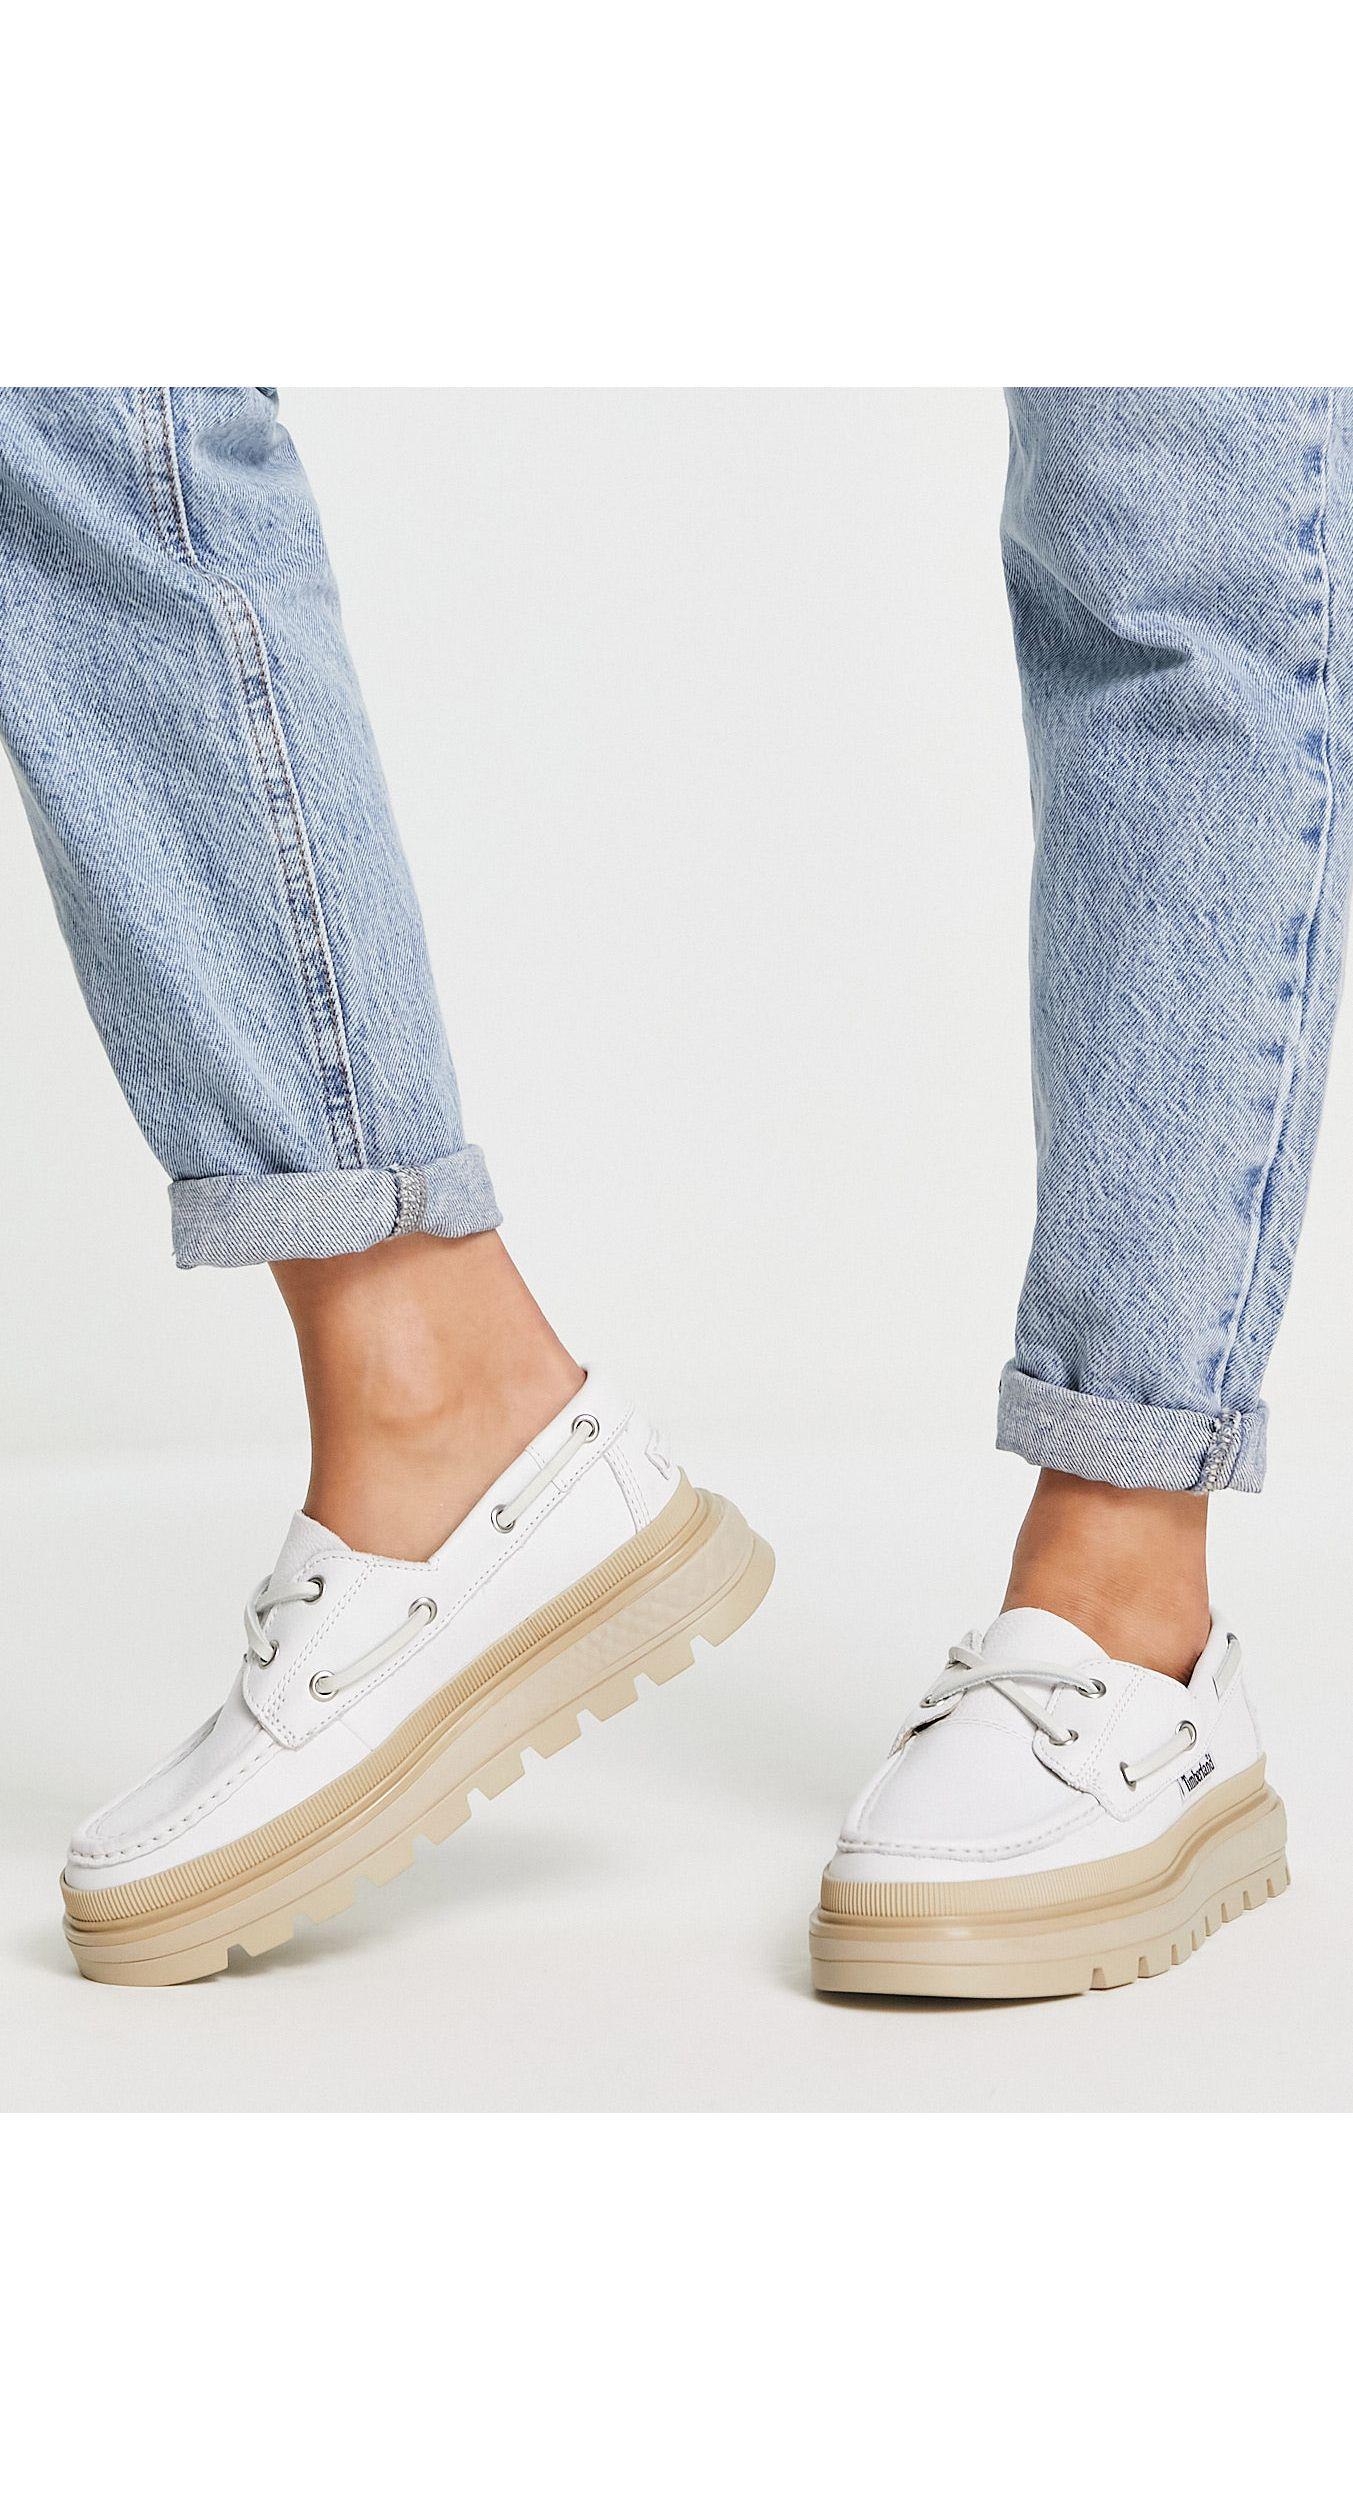 Timberland Ray City Boat Shoes in White | Lyst